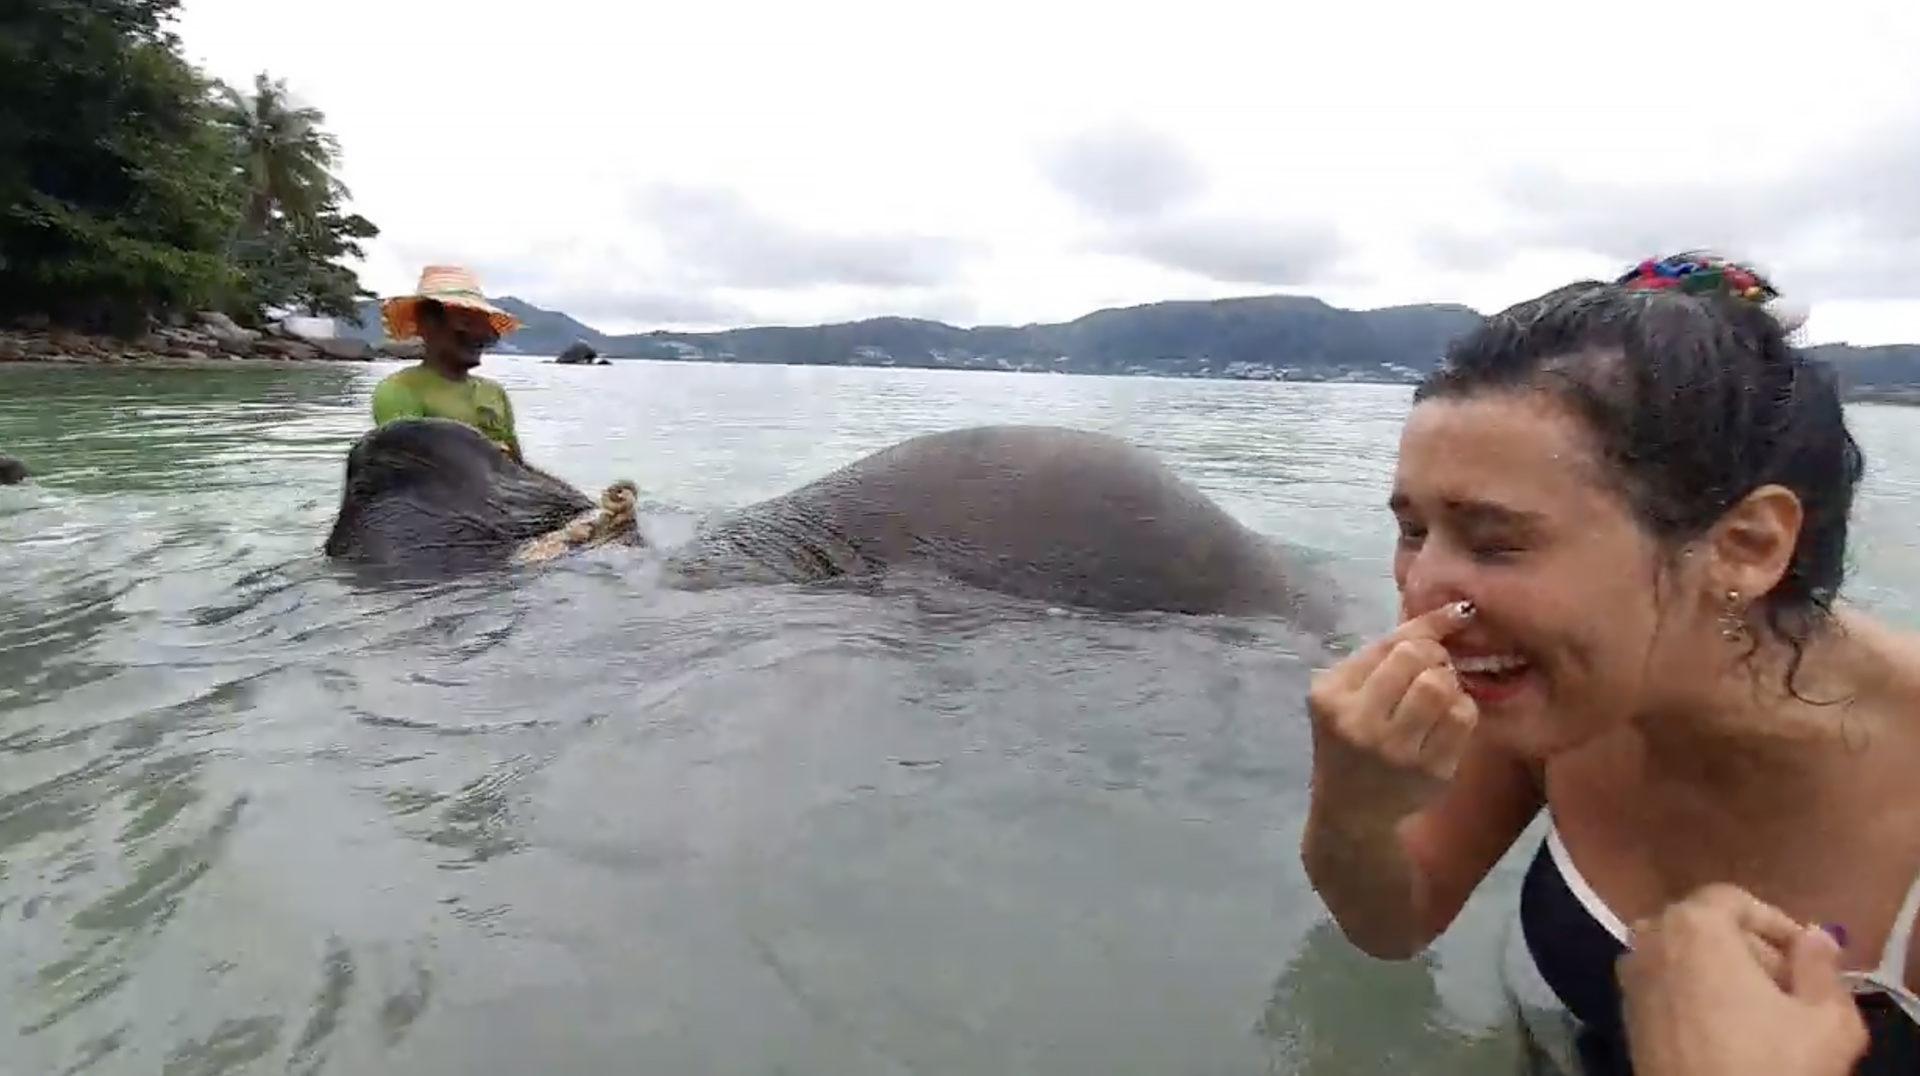 IRL Twitch streamer holds nose next to elephant in Phuket Thailand. 